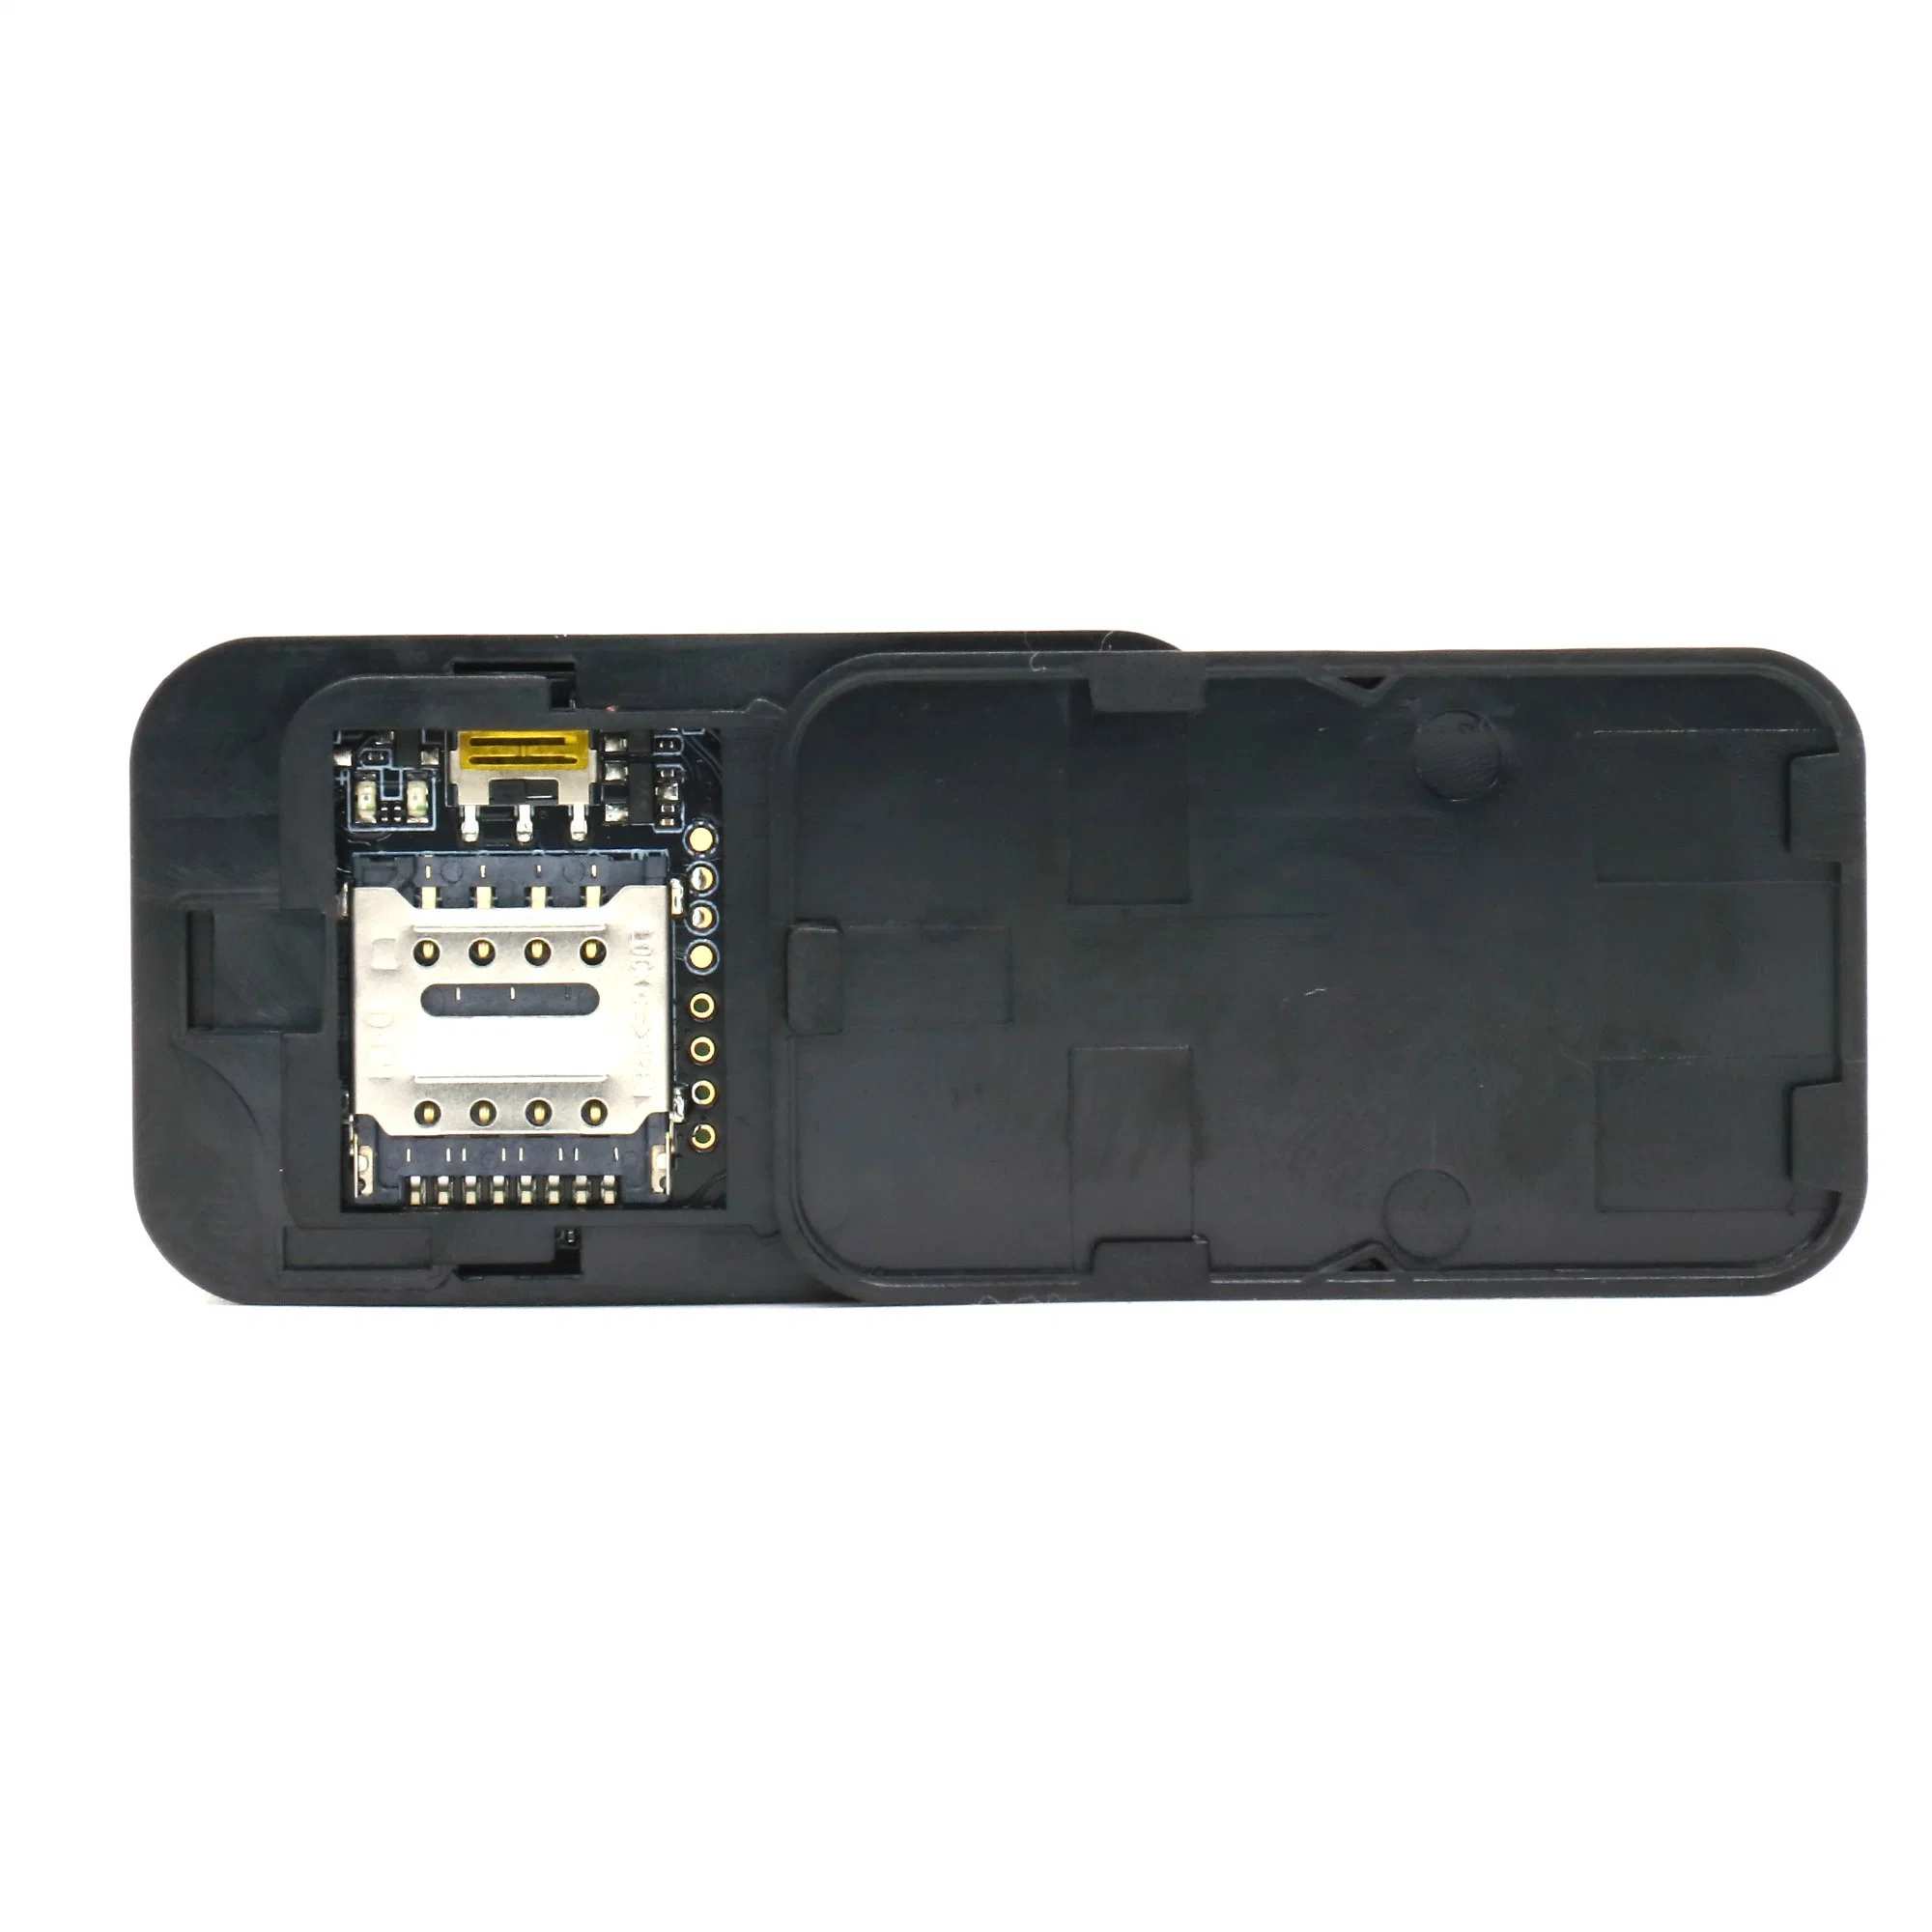 Obe GPS Tracking System for Vehicle GPS Tracker with Android and Sos Apps